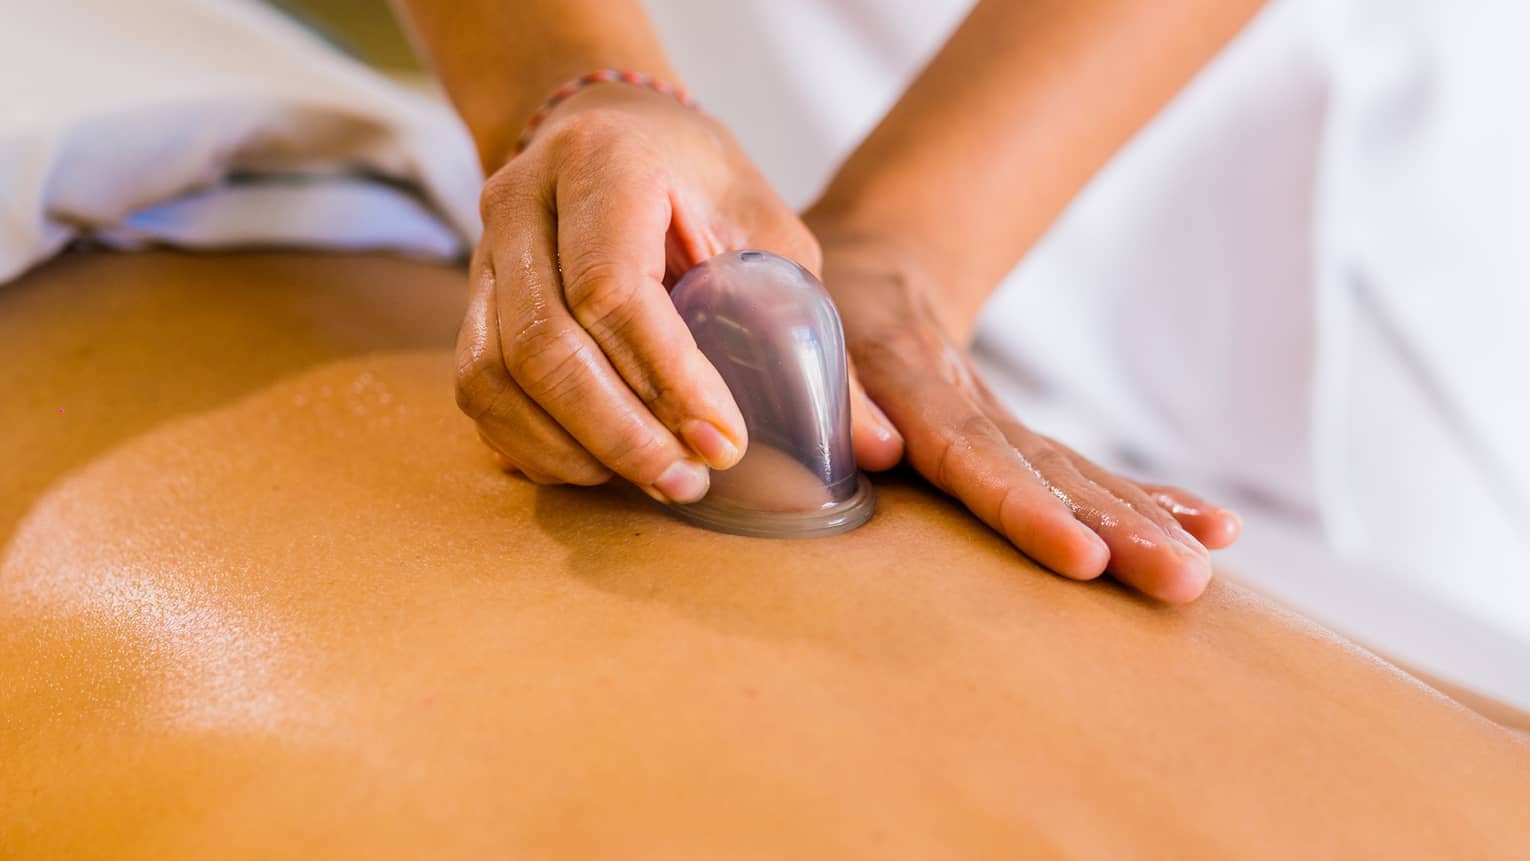 A woman lays on a massage table as a masseuse puts a cup on her back.